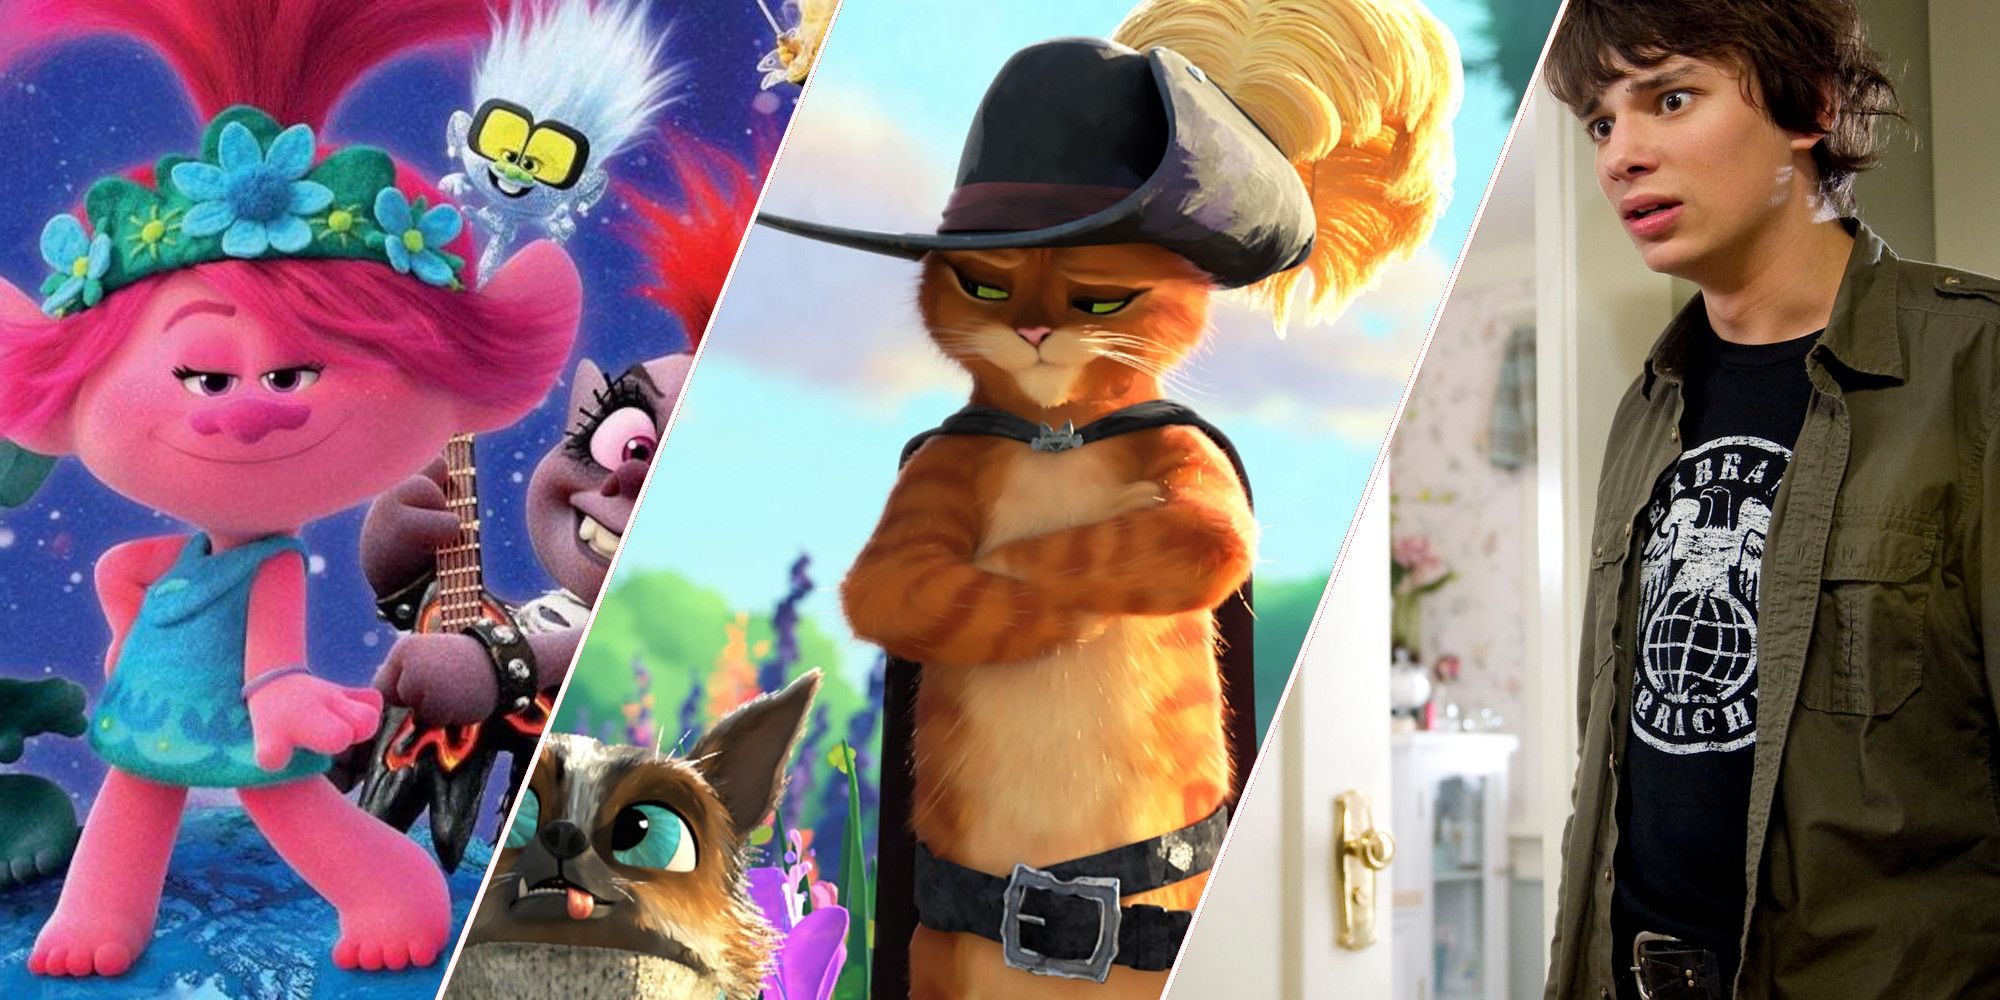 A collage of movies featuring Poppy from Trolls: World Tour, Puss in Boots from Puss in Boots: The Last Wish and Rodrick Heffley from Diary of a Wimpy Kid: Rodrick Rules